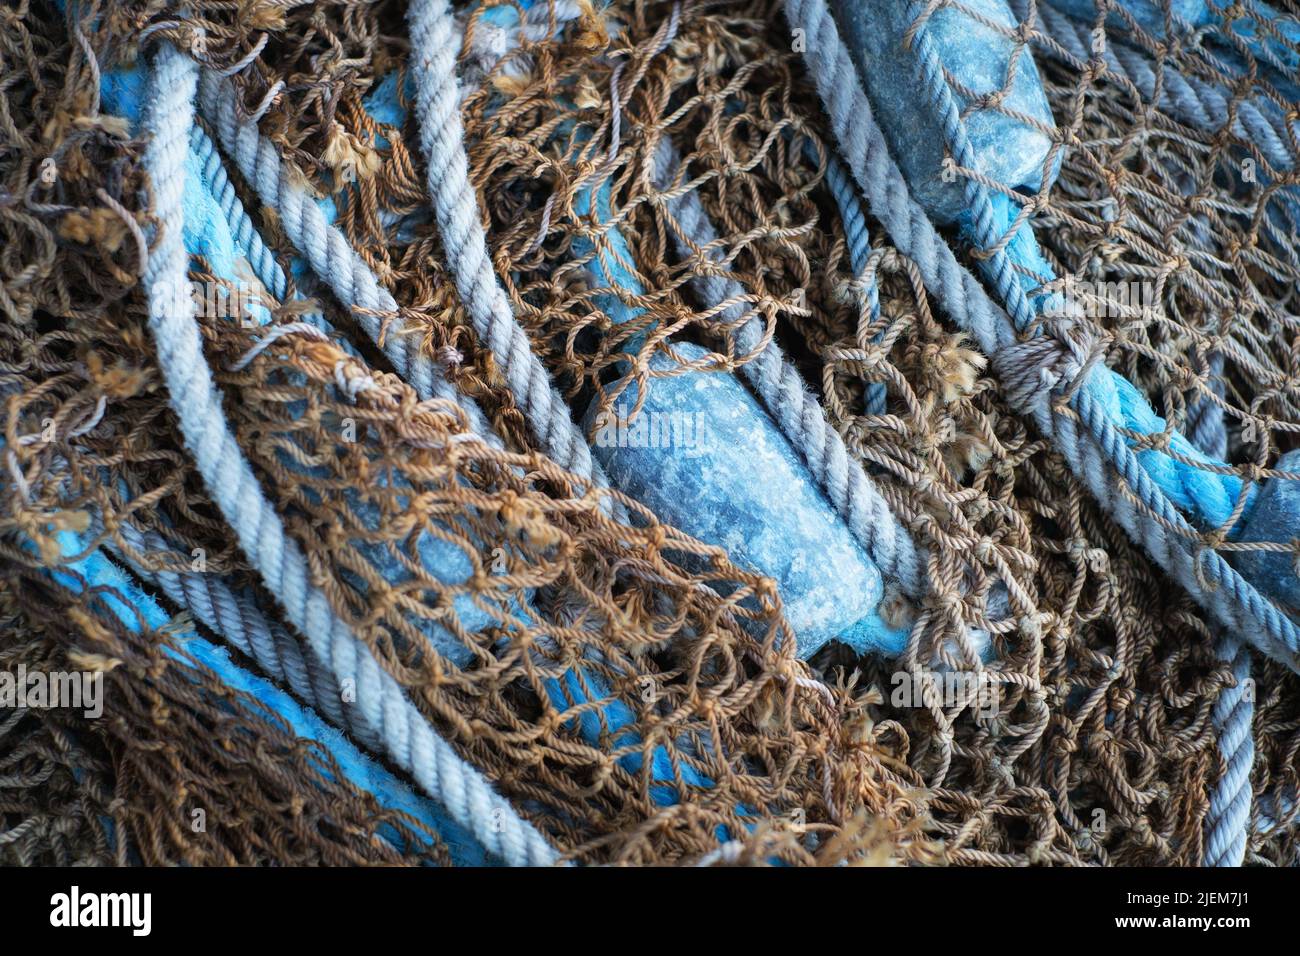 Buoys and a net tangible together as fishing gear or equipment at a harbor. Closeup of blue sea markers and mesh piled, grouped, or gathered together Stock Photo